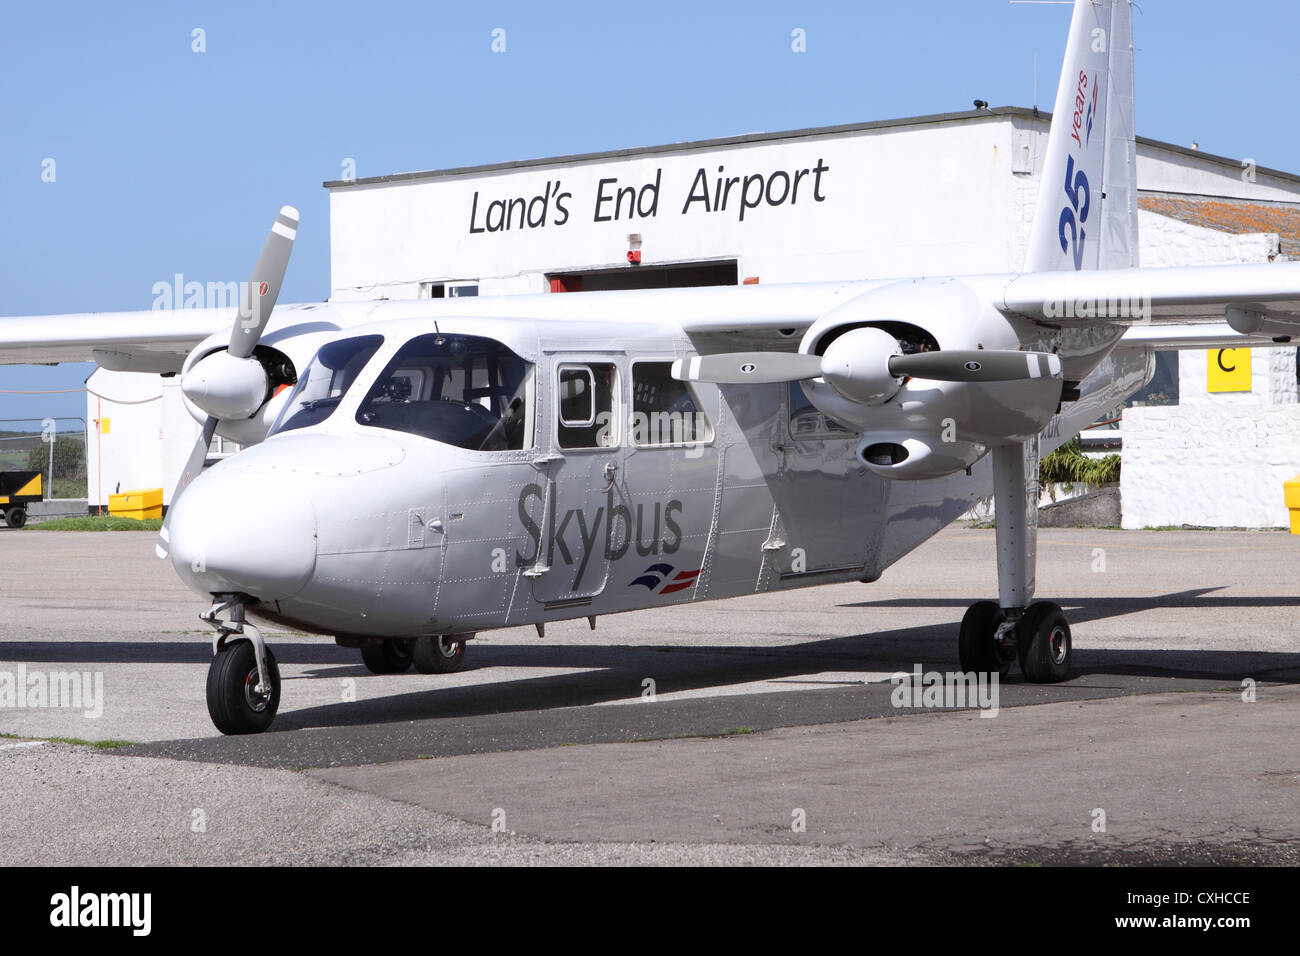 Lands End Airport Cornwall Skybus operate Islander aircraft to the Scilly Isles Stock Photo